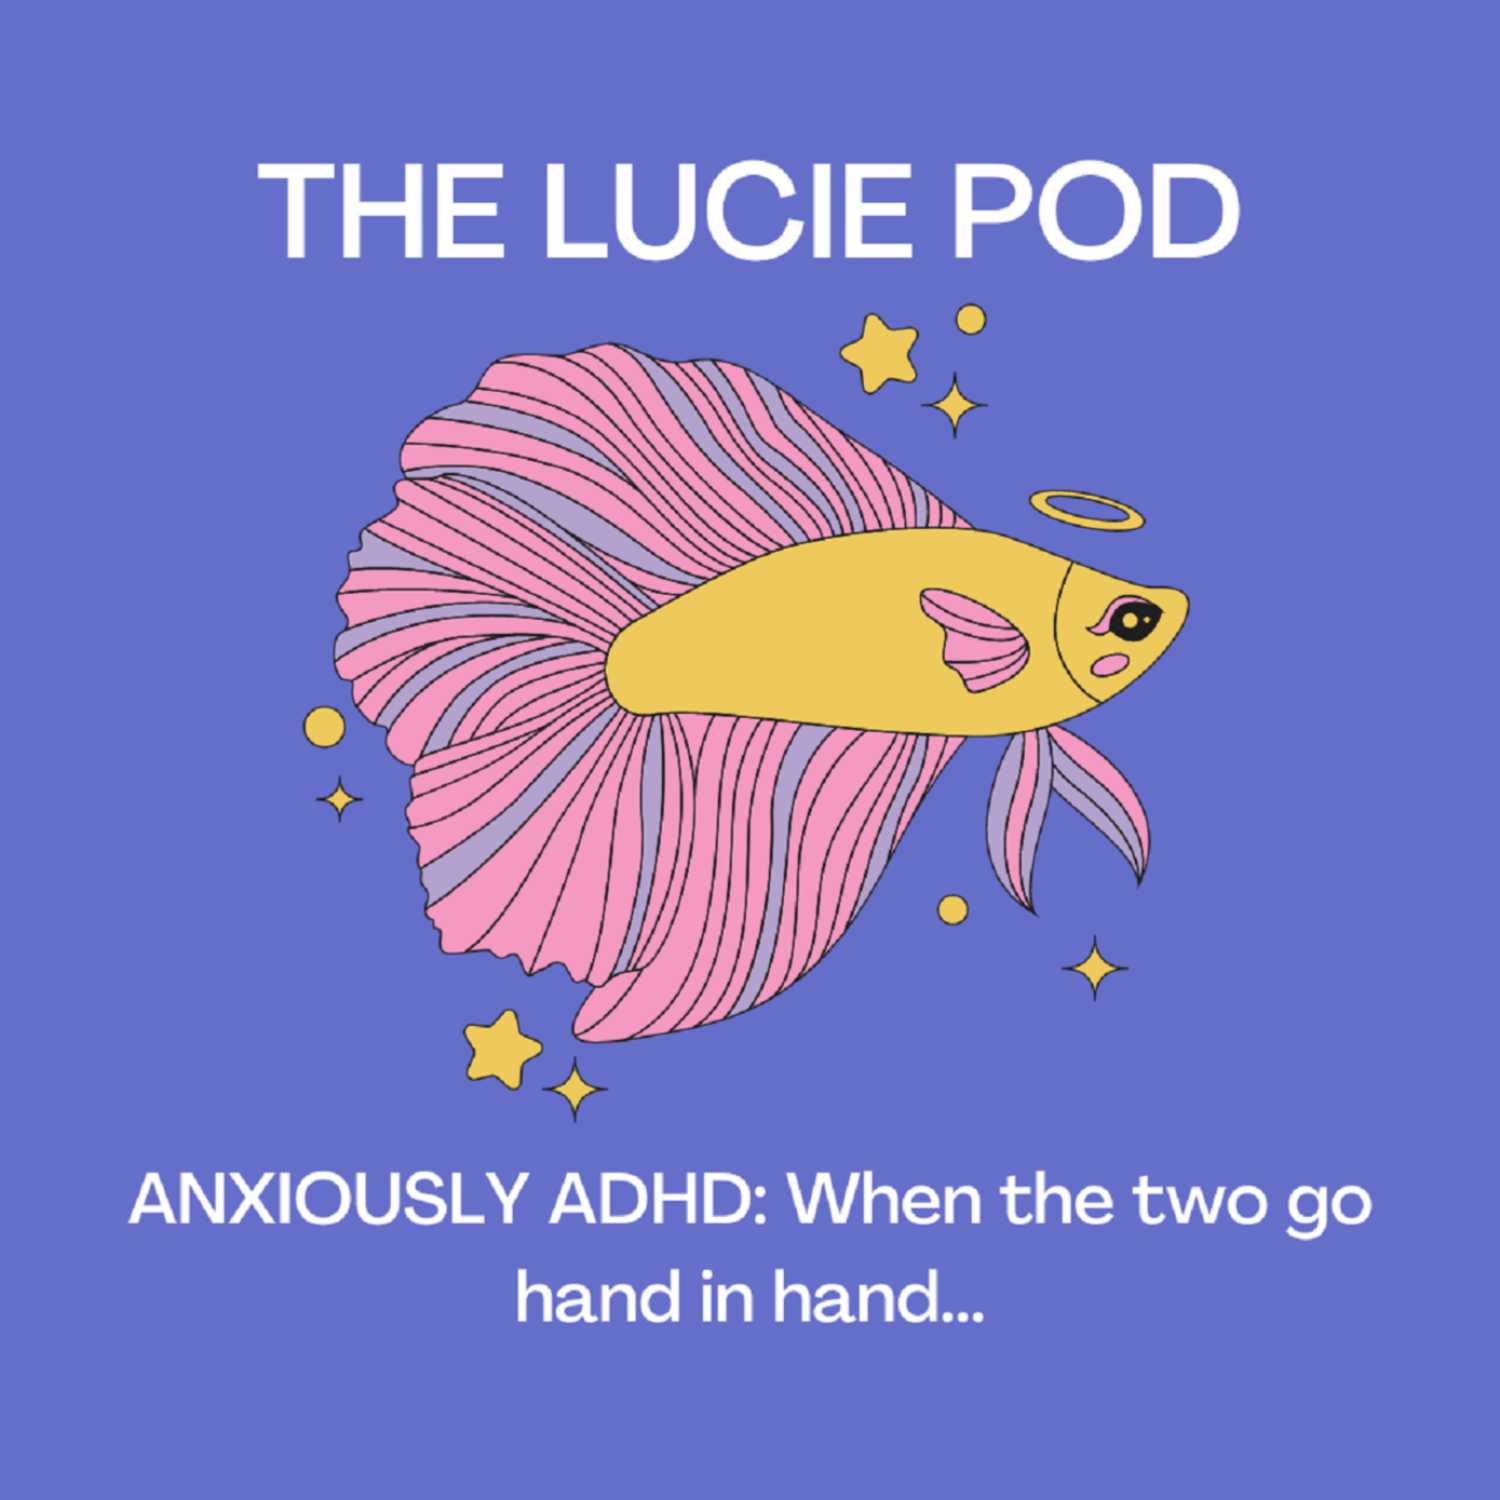 Anxiously ADHD: When the two go hand in hand